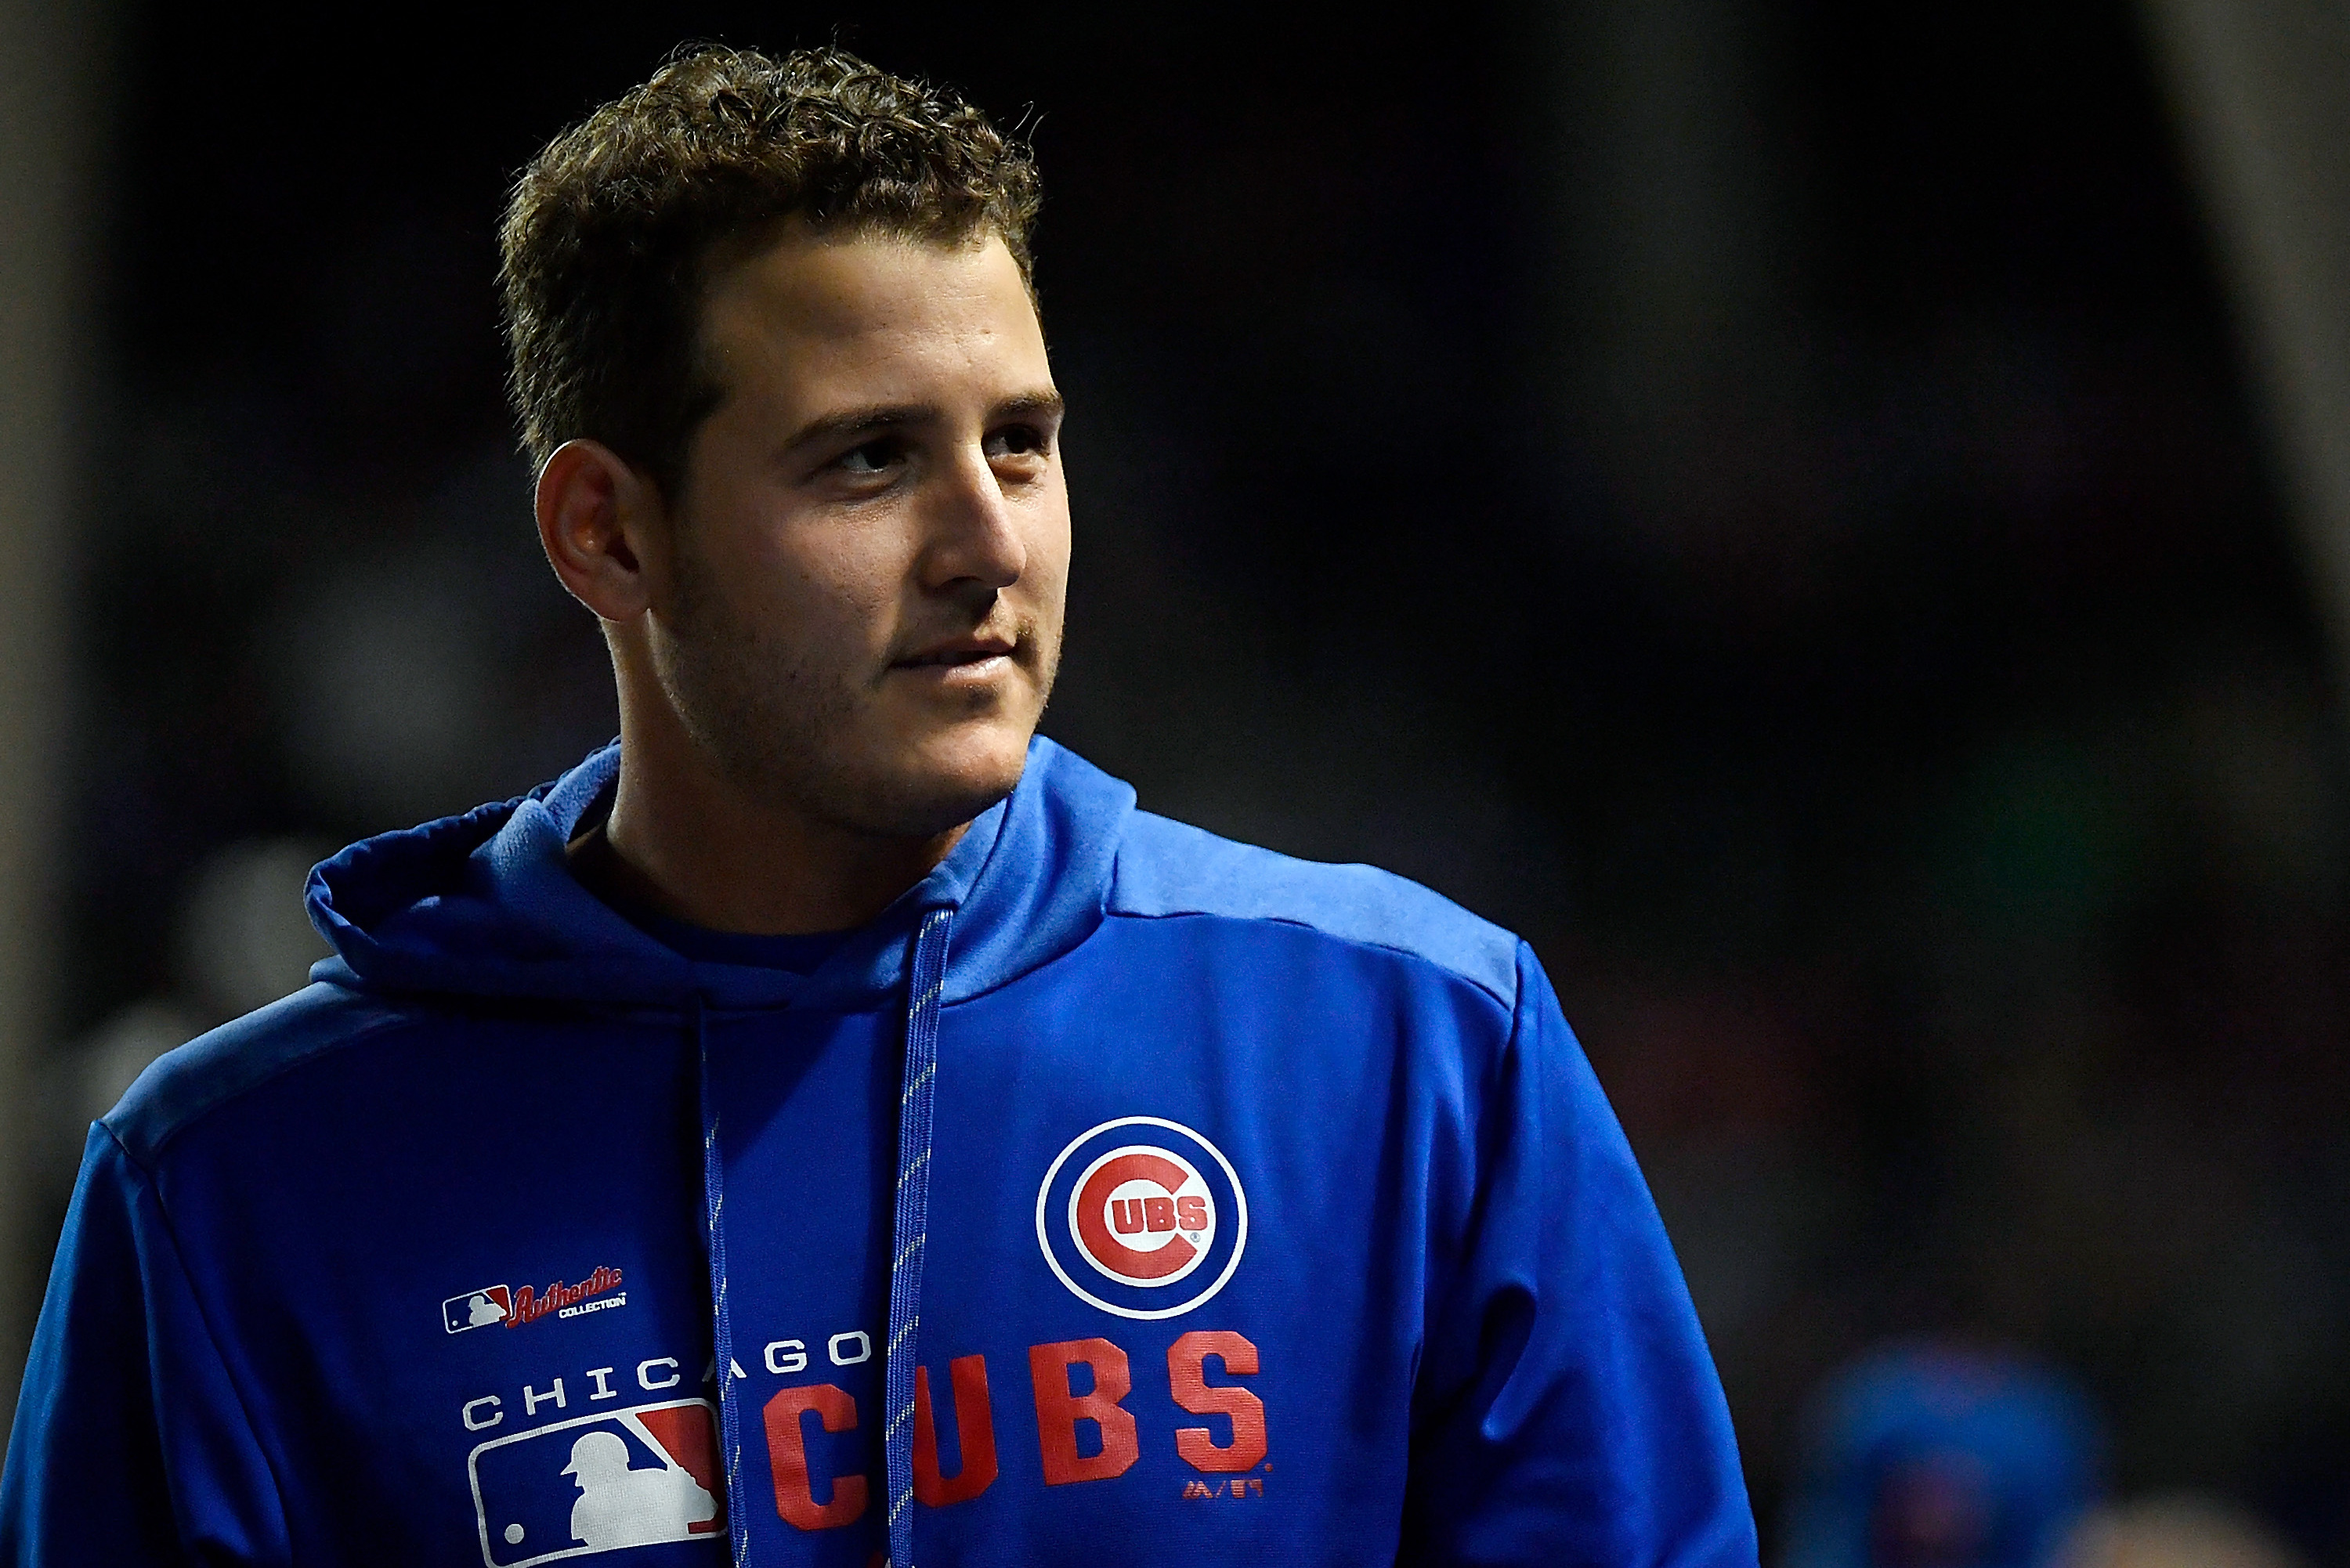 Cubs star Anthony Rizzo twerks his way to 'Beer Money' victory